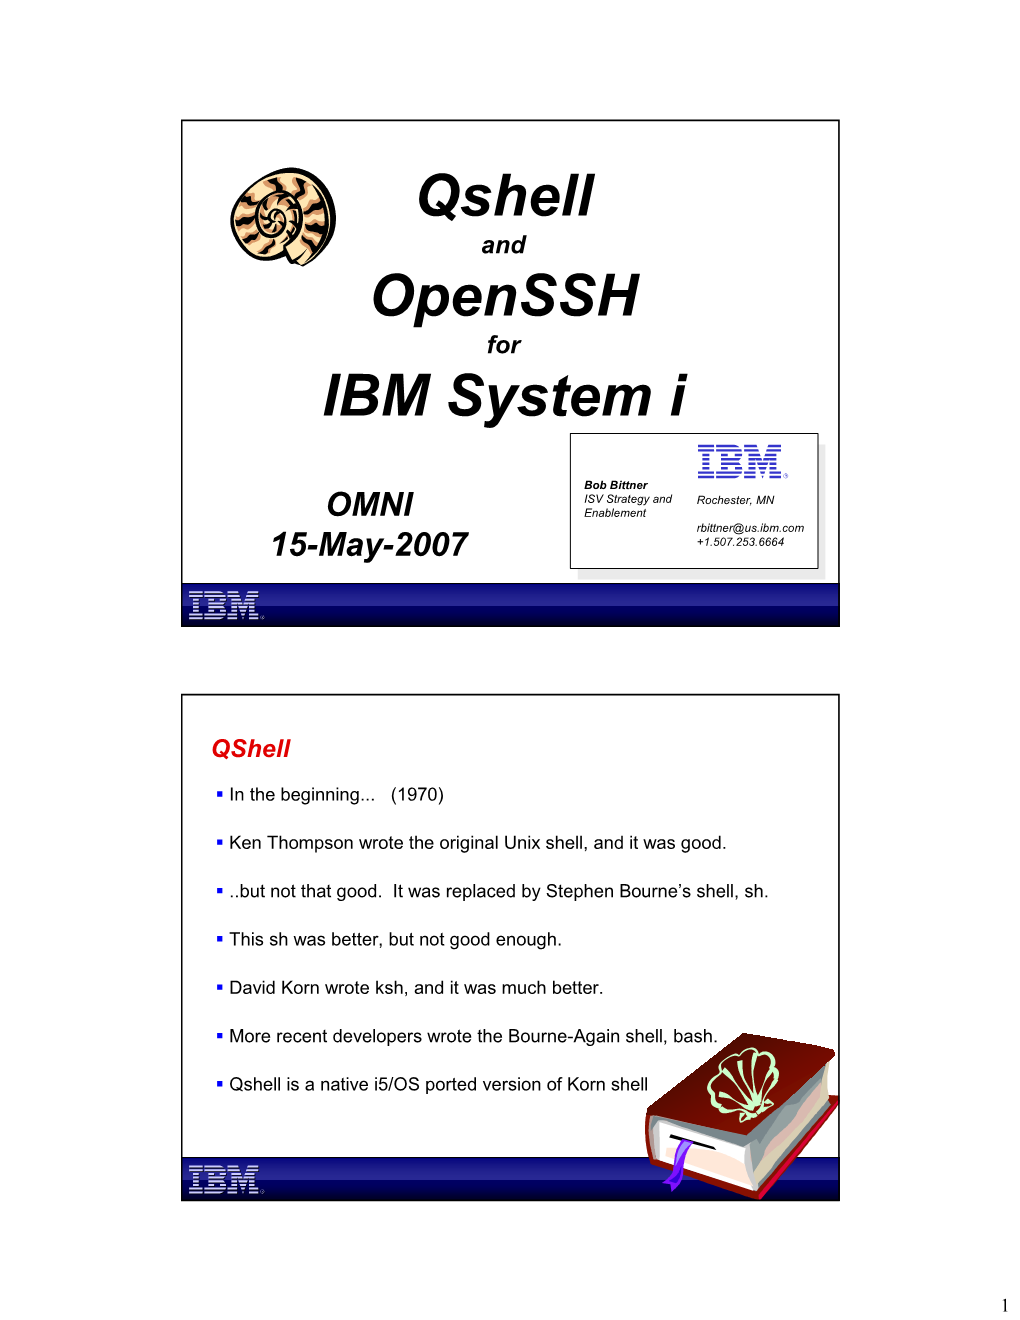 Qshell and Openssh for IBM System I